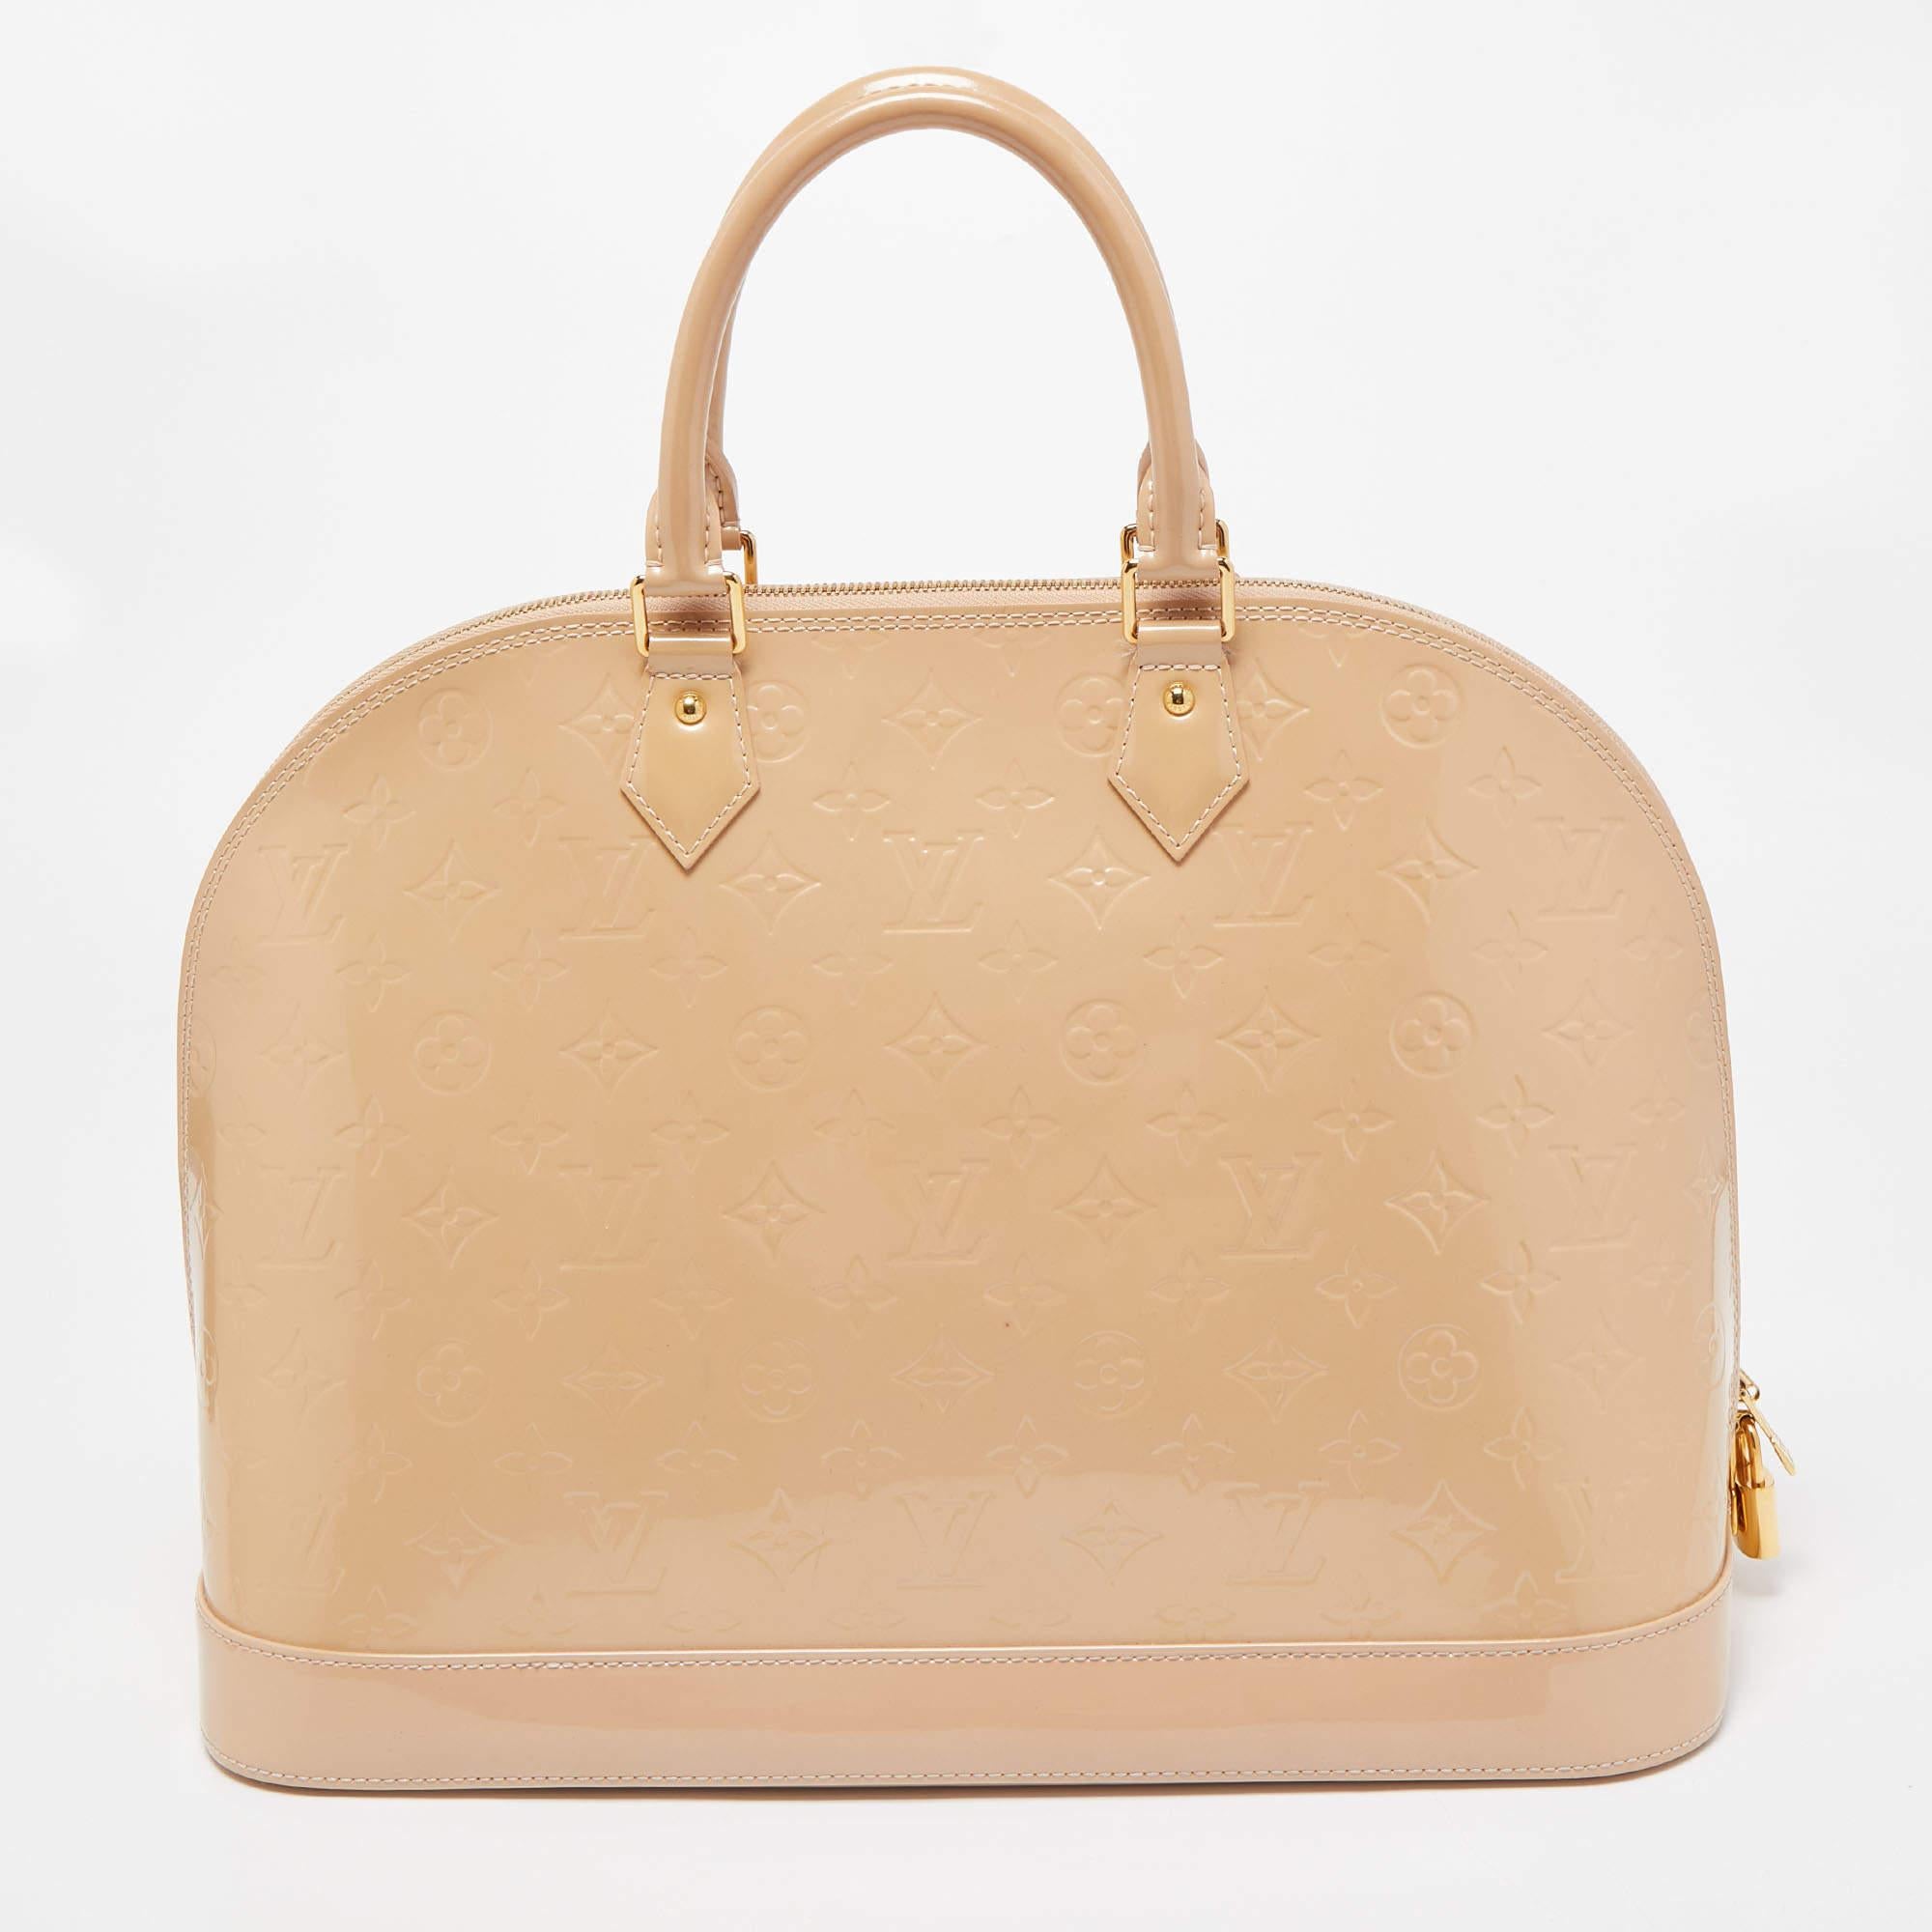 From one of the most iconic collections of Louis Vuitton, this Alma GM bag is imbued with exquisite craftsmanship and historic details. Constructed from Rose Monogram Vernis, it displays dual top handles, gold-tone hardware, and a padlock. The